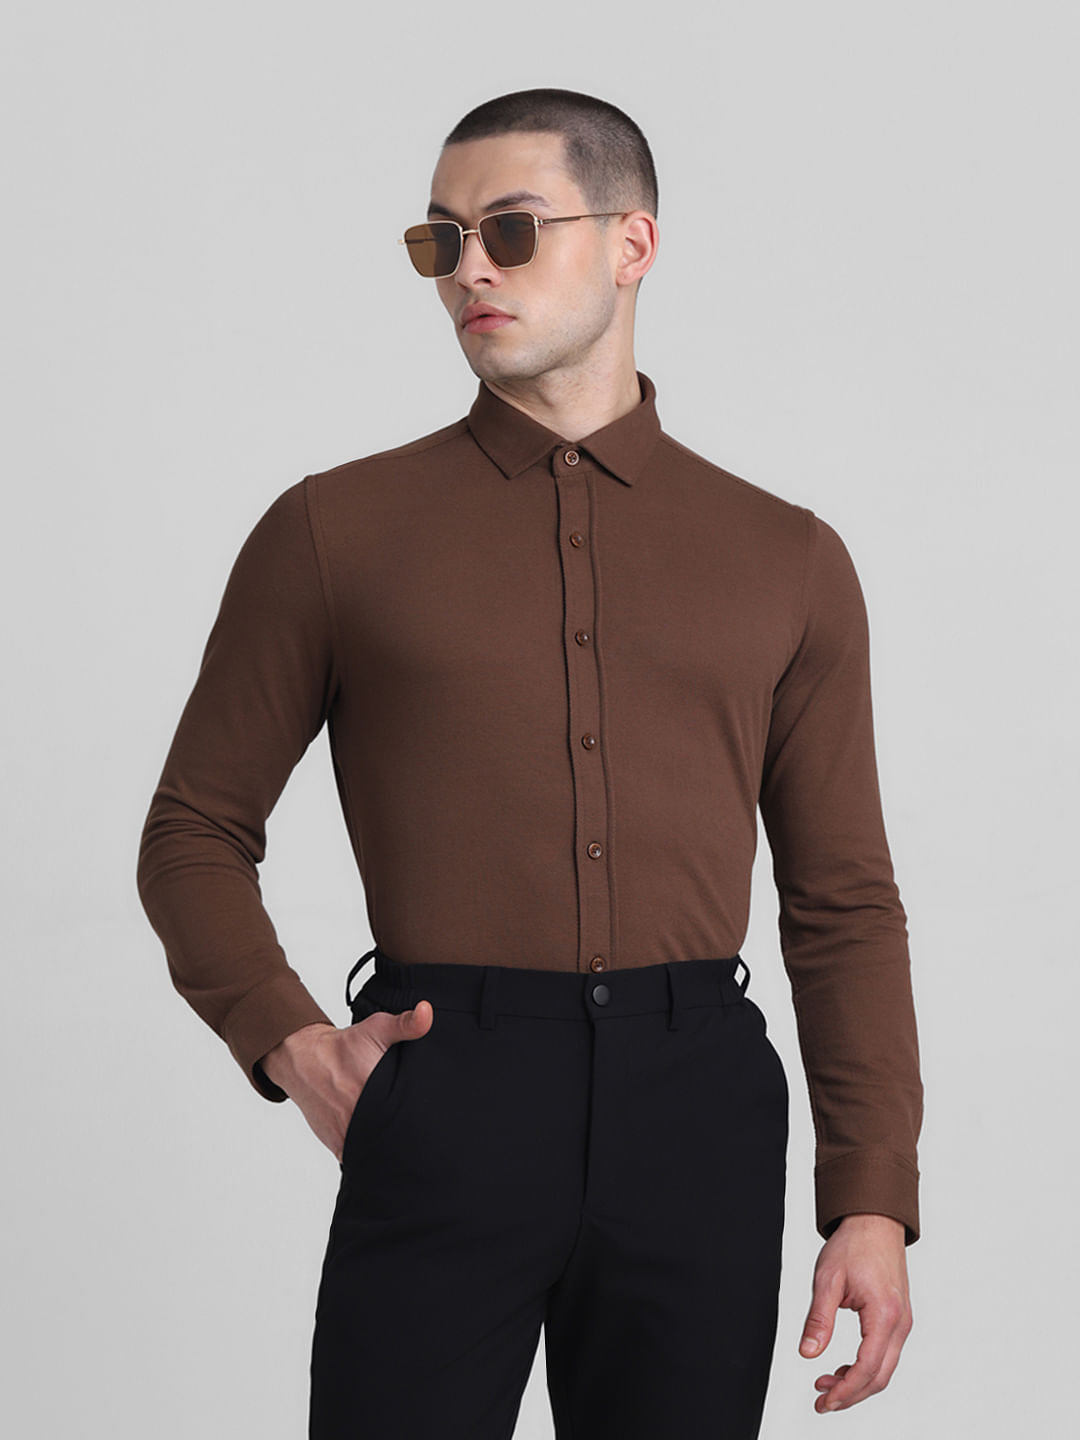 Black Long Sleeve T-Shirt with Brown Pants Outfits For Men (14 ideas &  outfits) | Lookastic